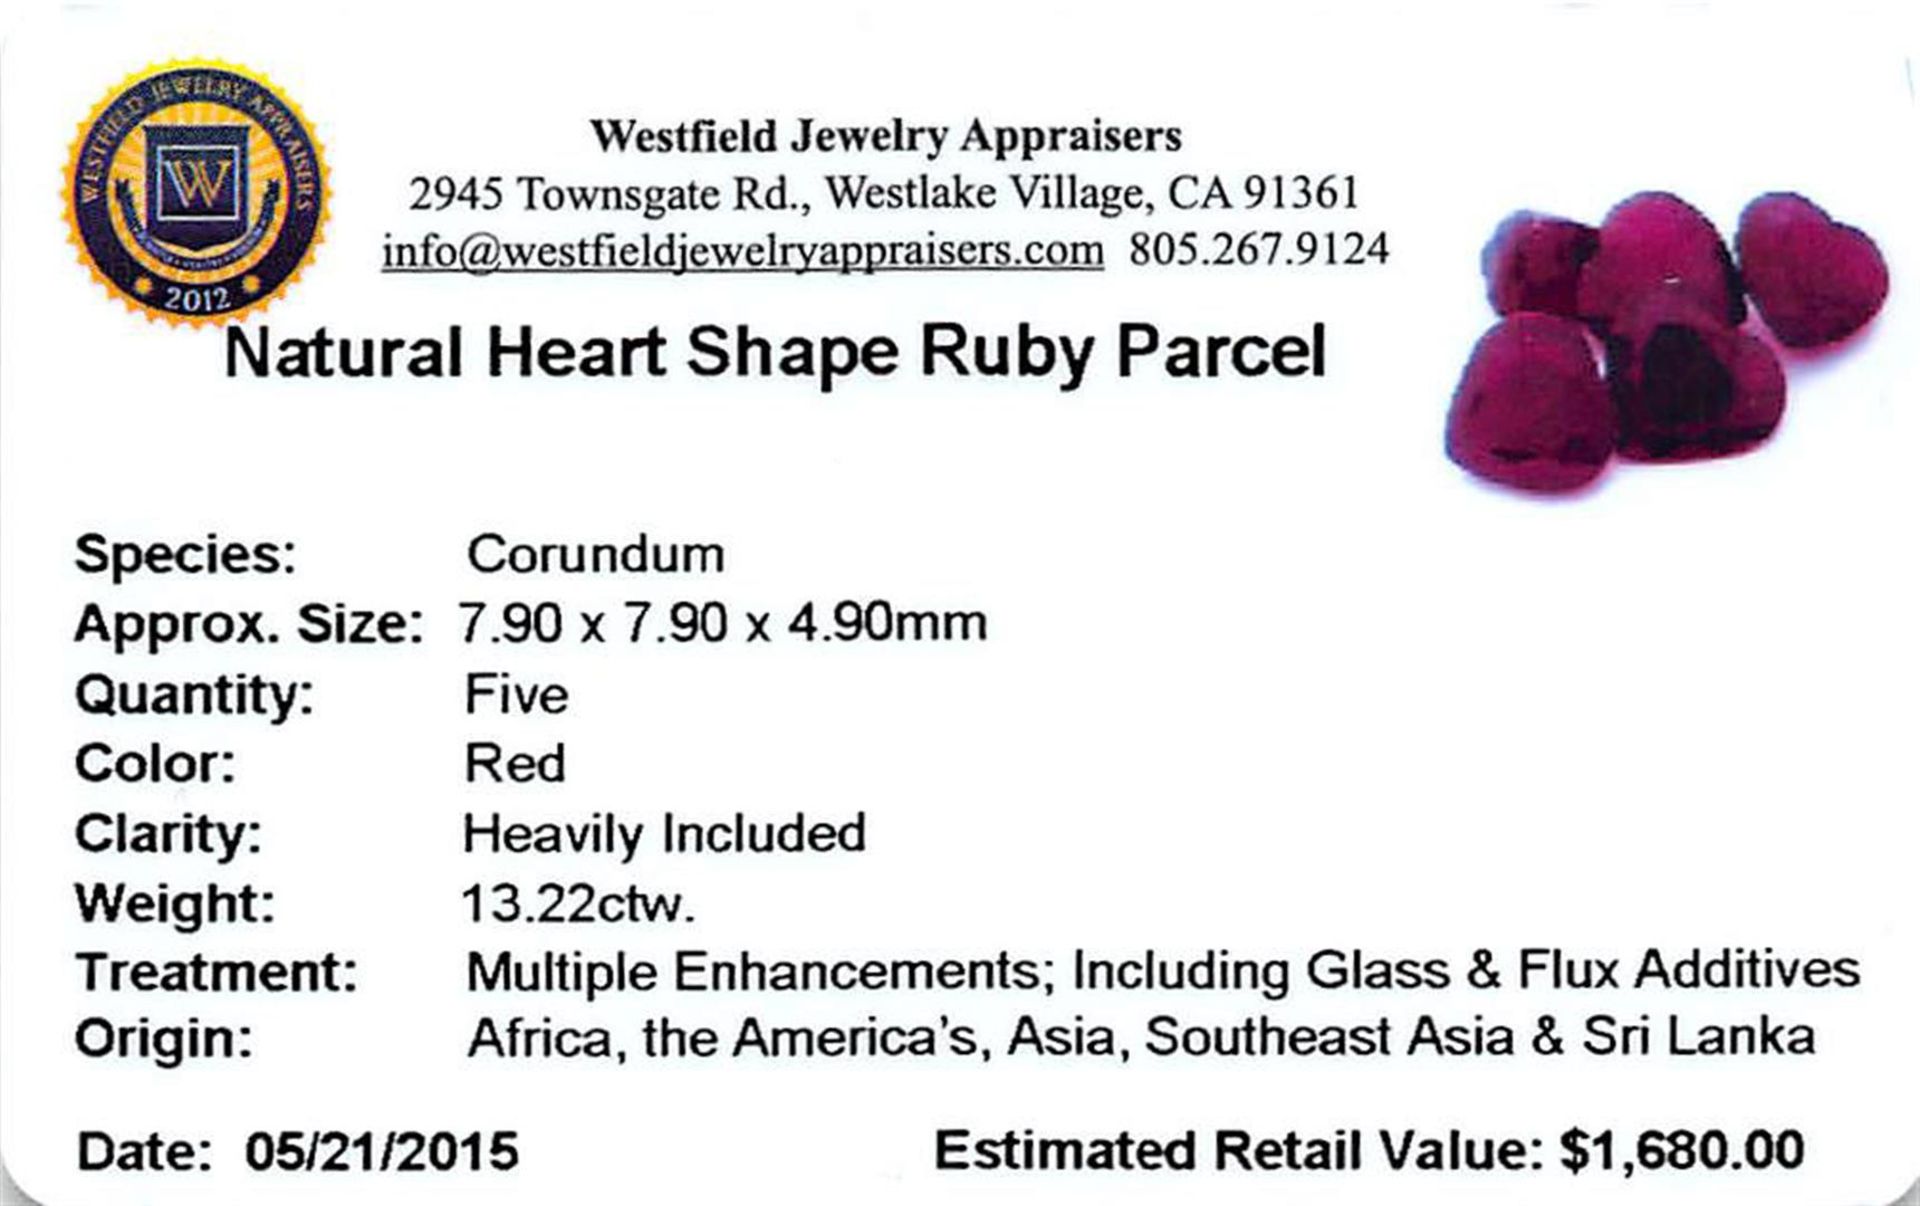 13.22 ctw Heart Mixed Ruby Parcel - Image 2 of 2